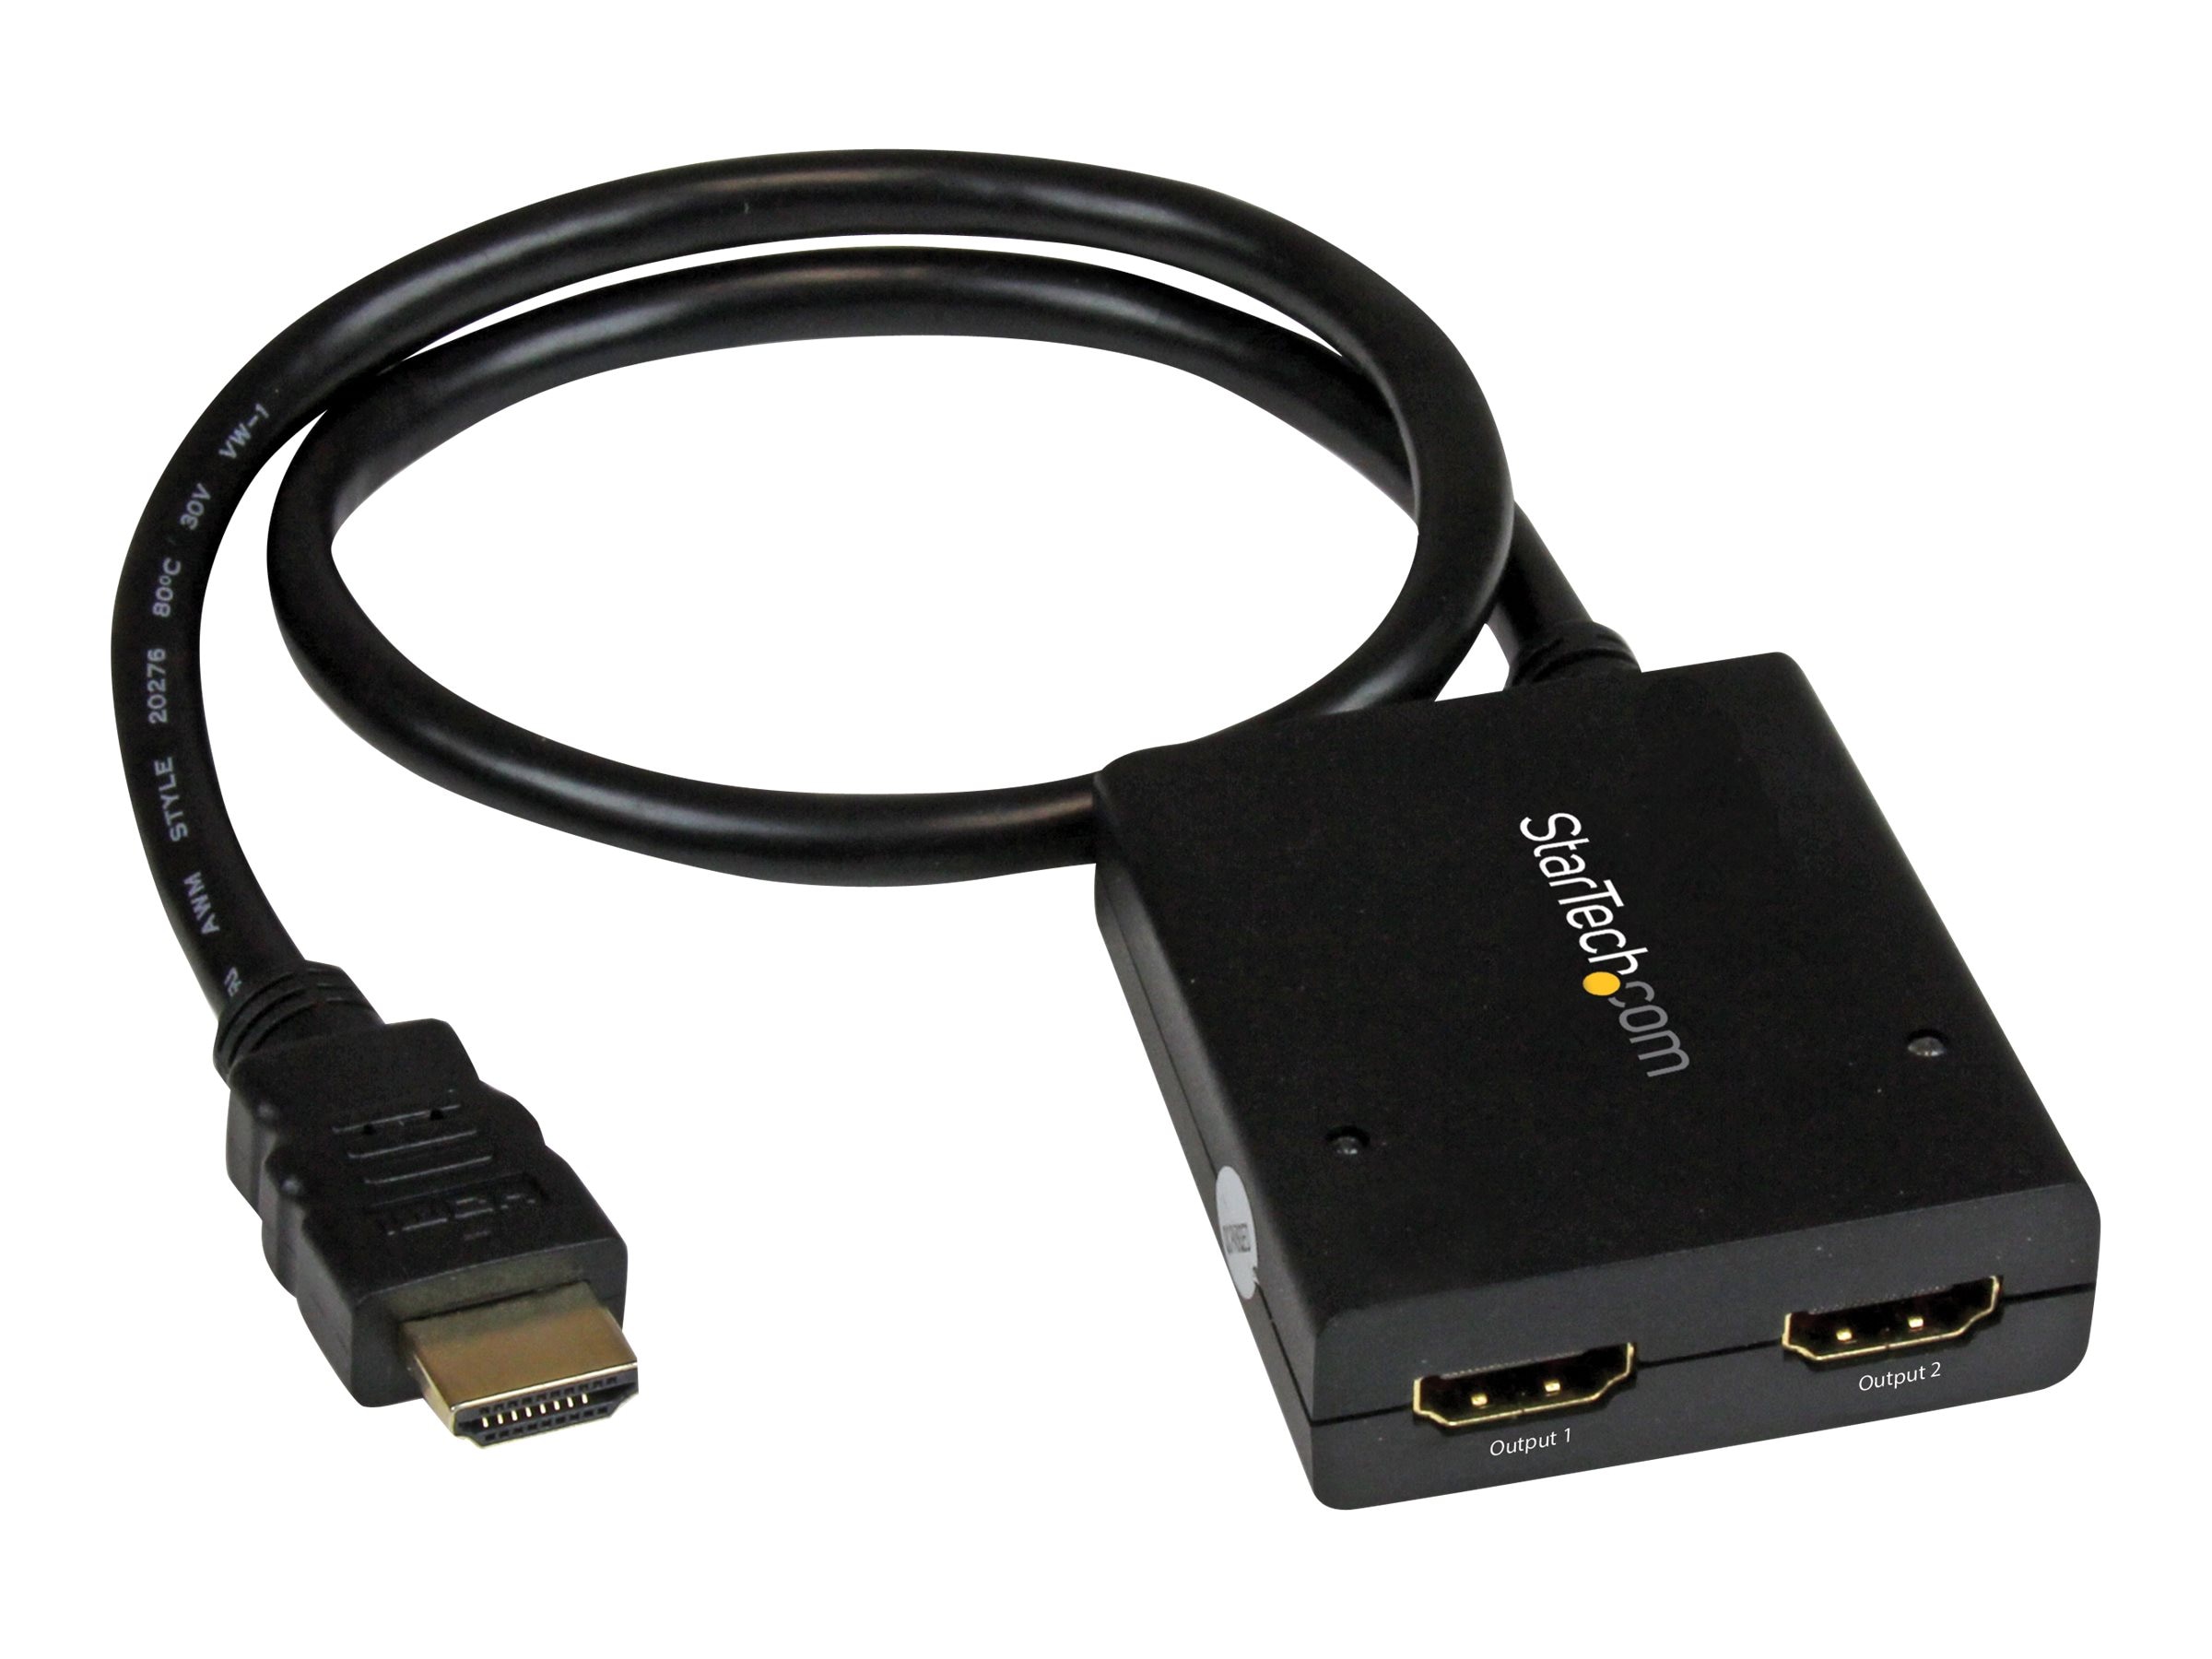 Hdmi-compatible Converter, Aux Cord Splitter, Cable Adapters